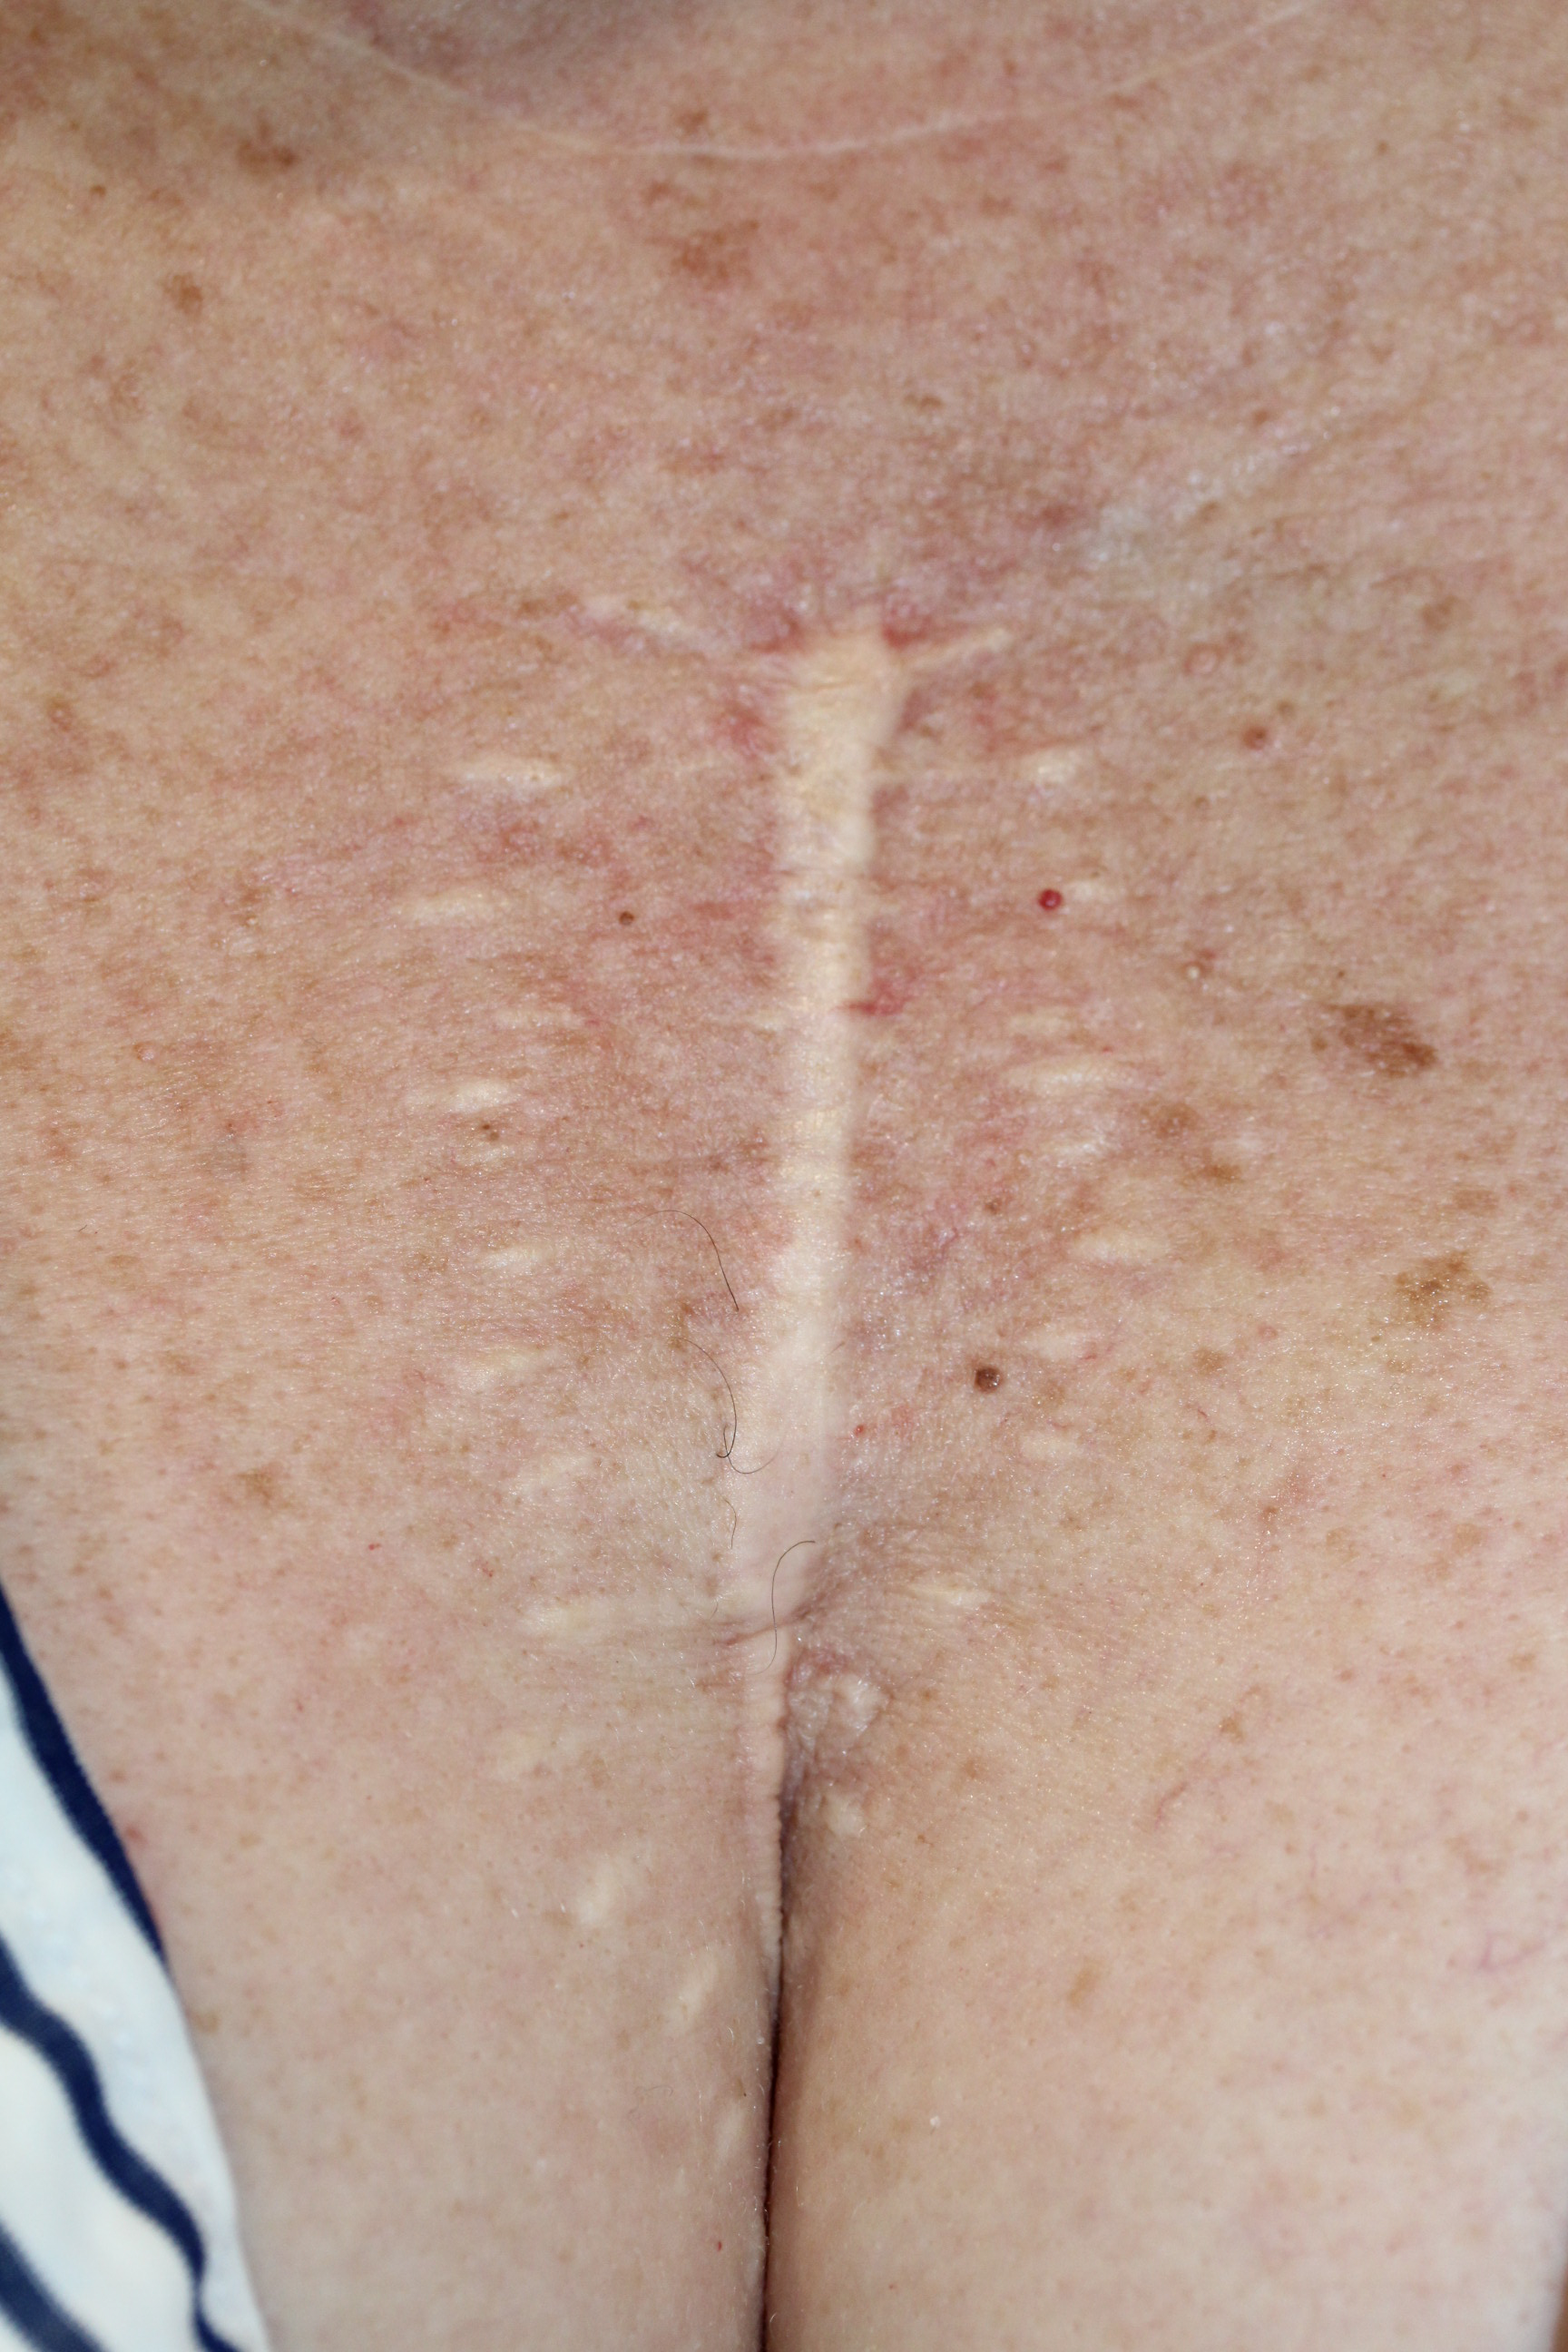 Ruth Swissa Scar Camouflage Medical tattooing Discoloration